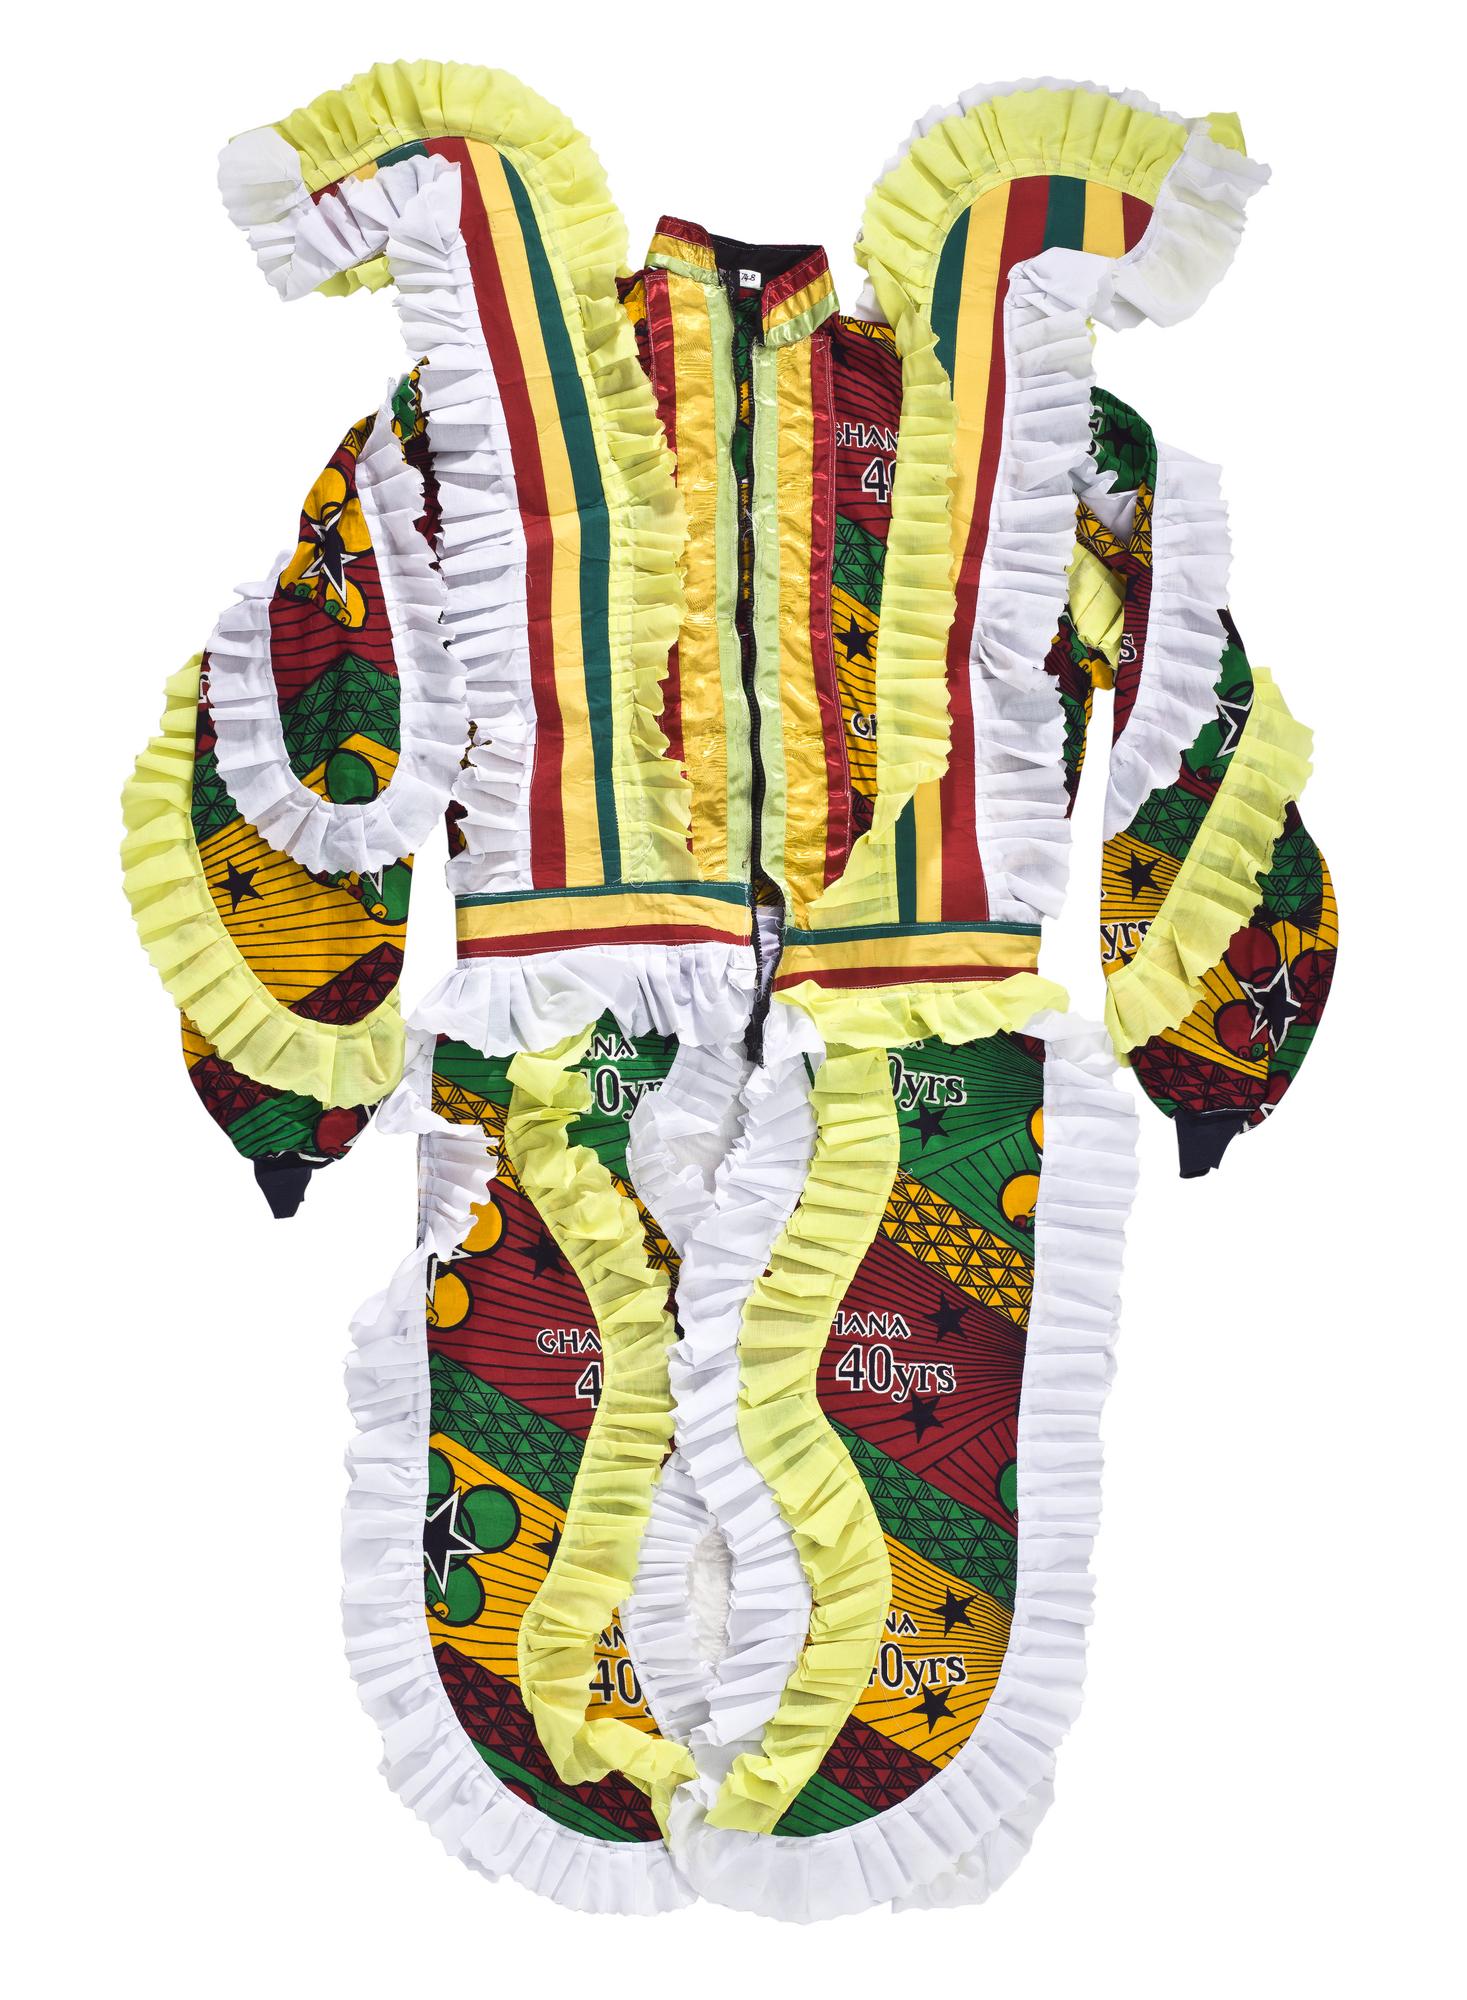 Tailored jacket with zip fastening, in red, green, yellow, black and white fabric with shoulder decoration and four tail features, extending from the waistband, part of an Ugly Man fancy dress masquerade costume, purchased from a tailor in Winneba by D.A. Acquandoh (Hippies): Africa, West Africa, Ghana, Elmina, collected in 2000 - 2001 